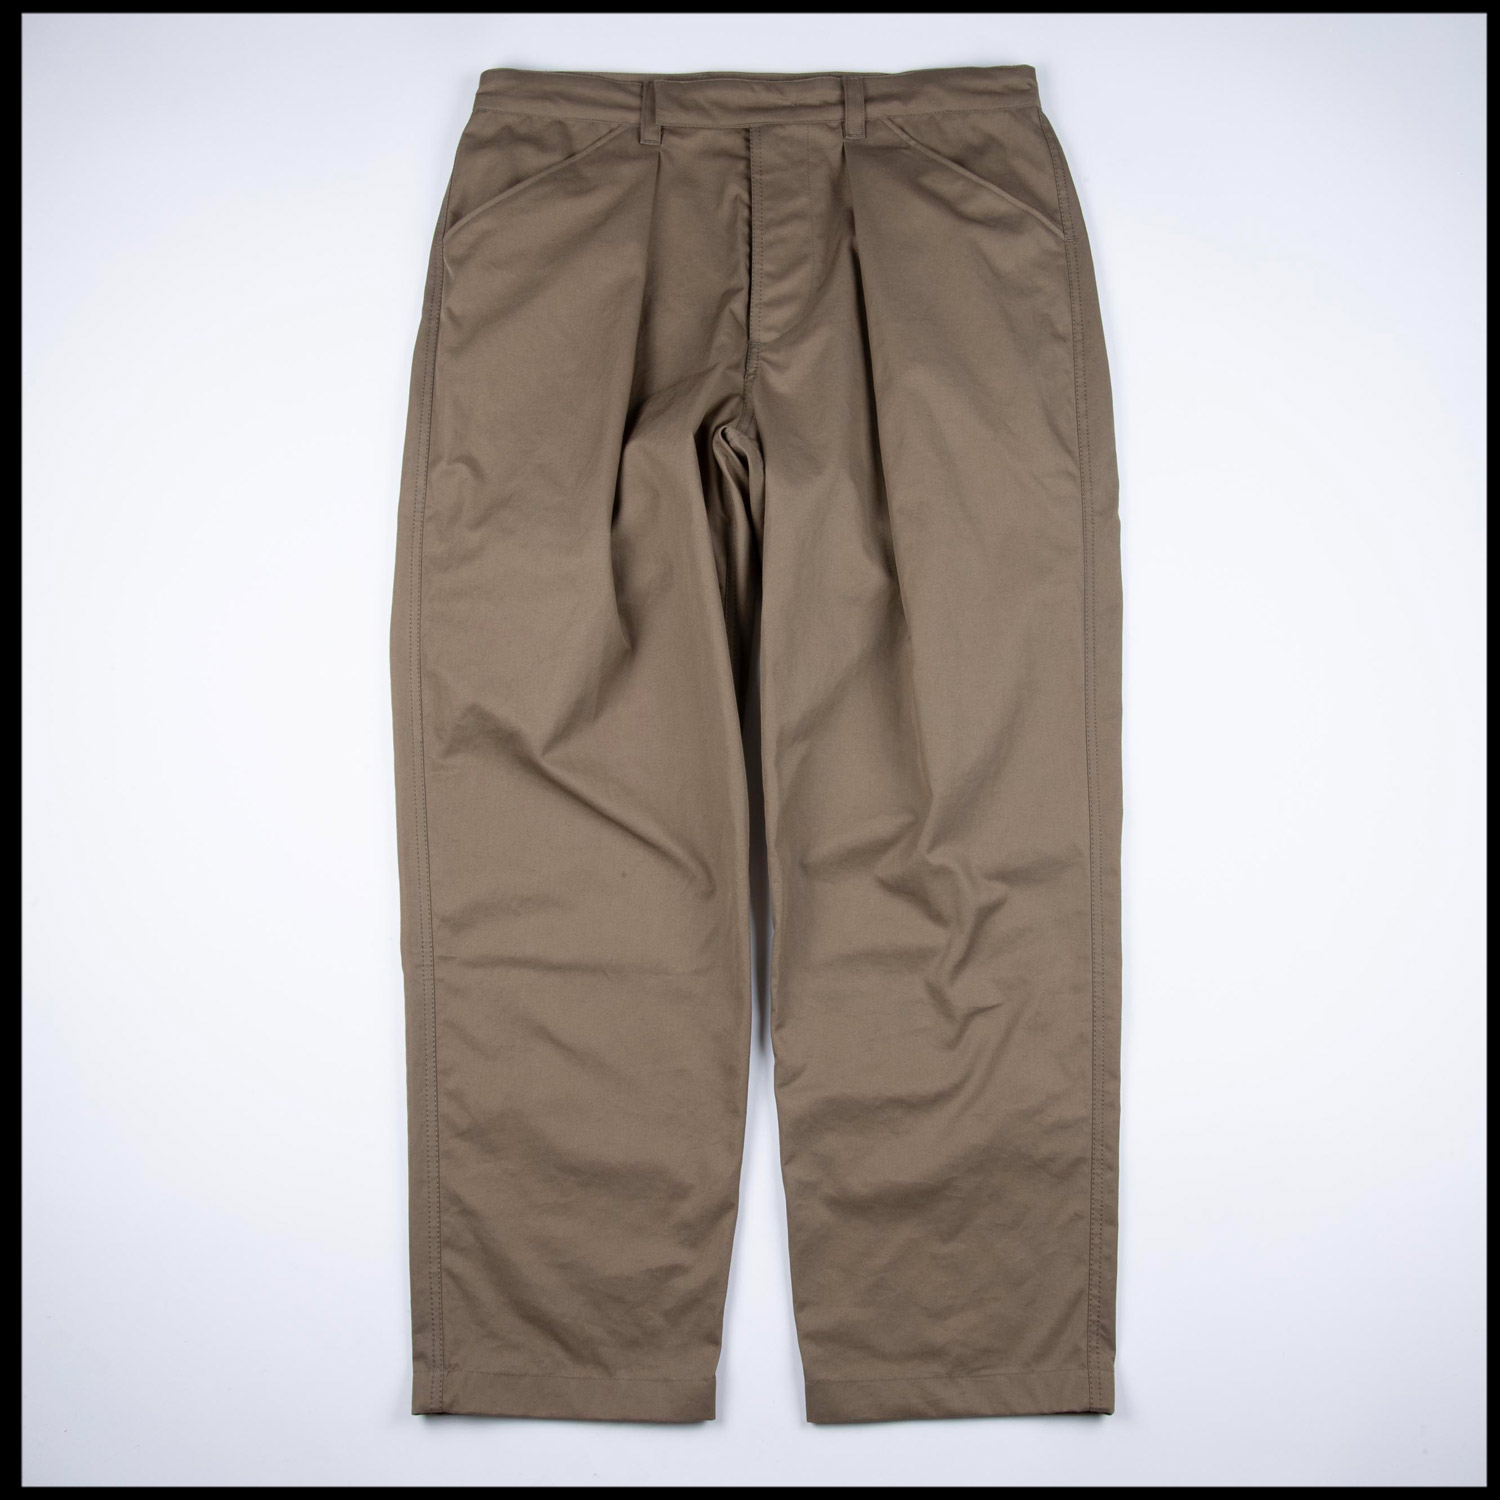 CHINO pants in Olive color by Arpenteur